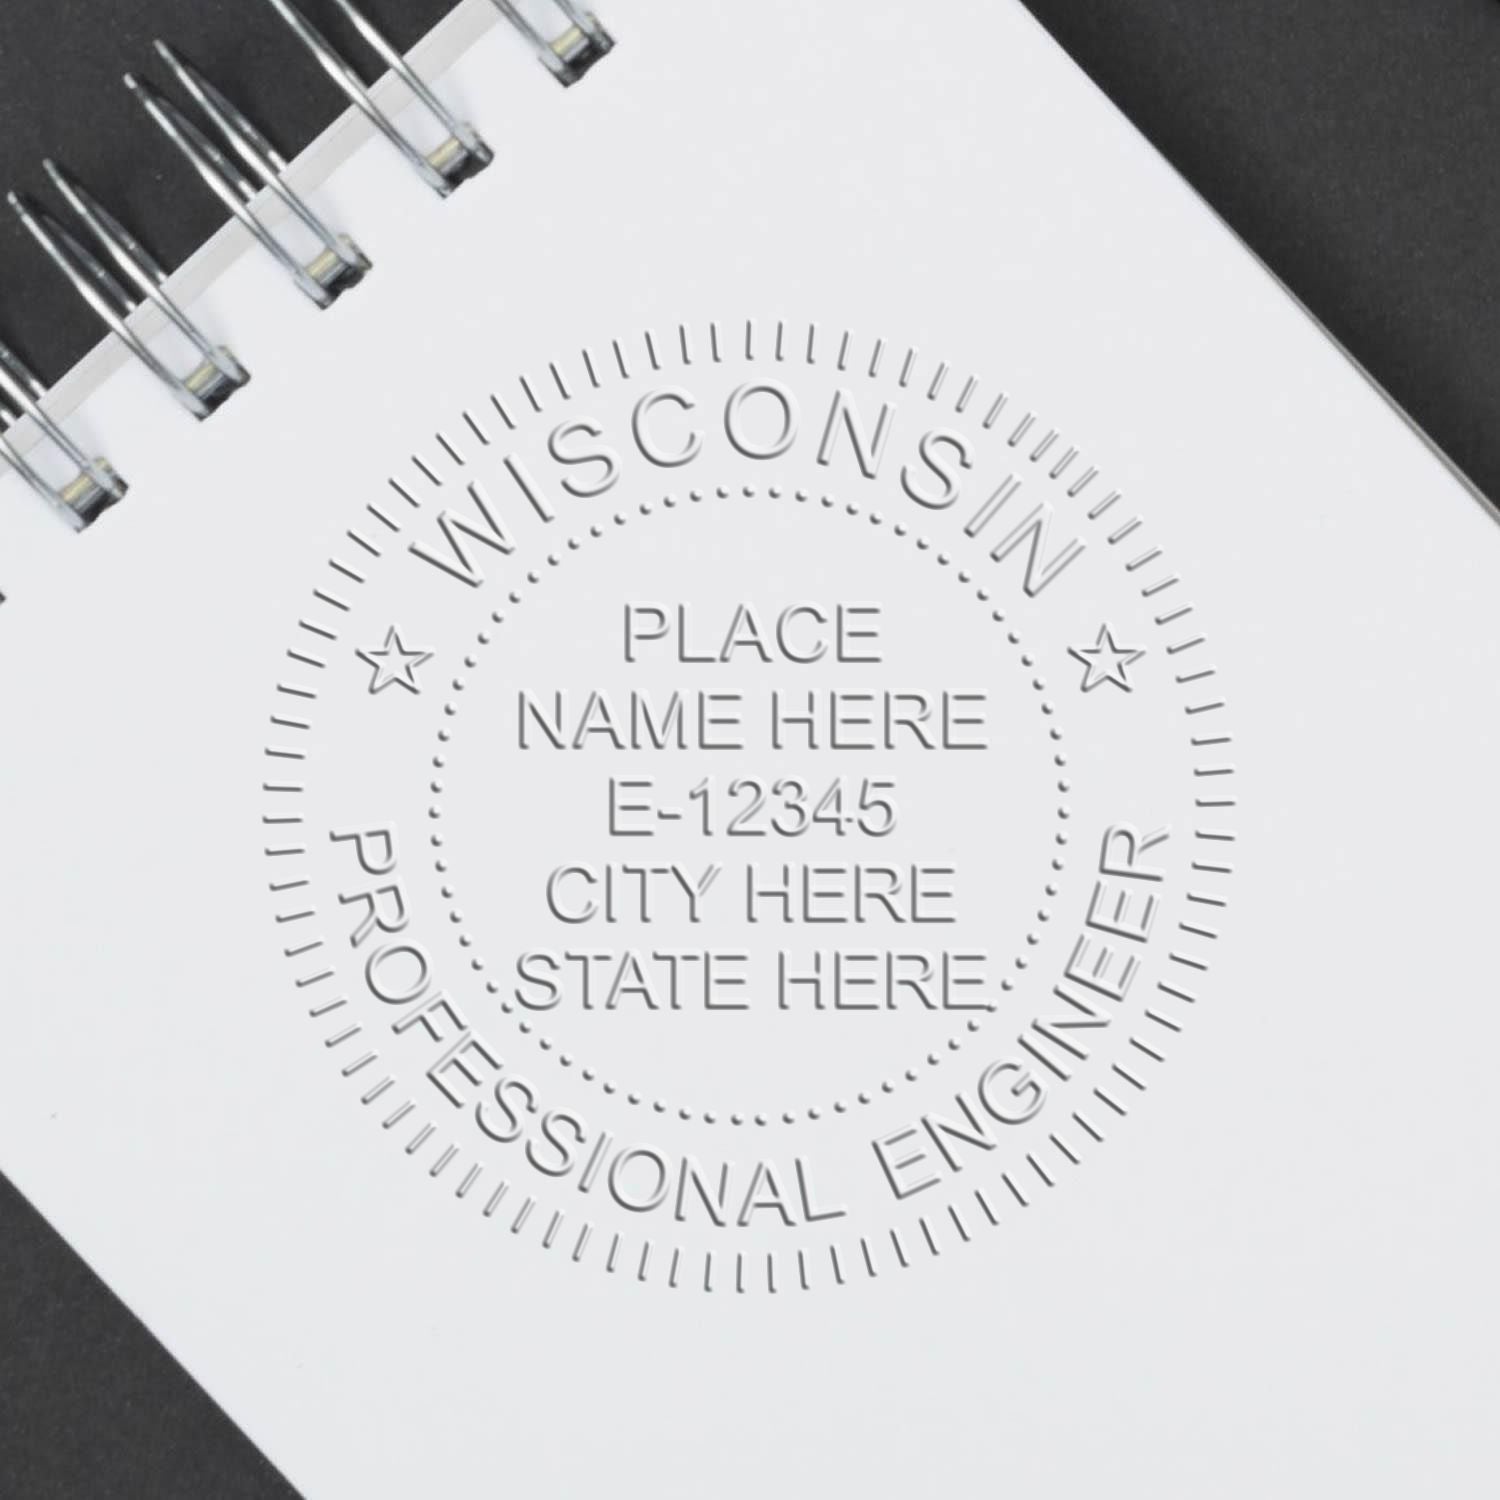 A stamped impression of the Wisconsin Engineer Desk Seal in this stylish lifestyle photo, setting the tone for a unique and personalized product.